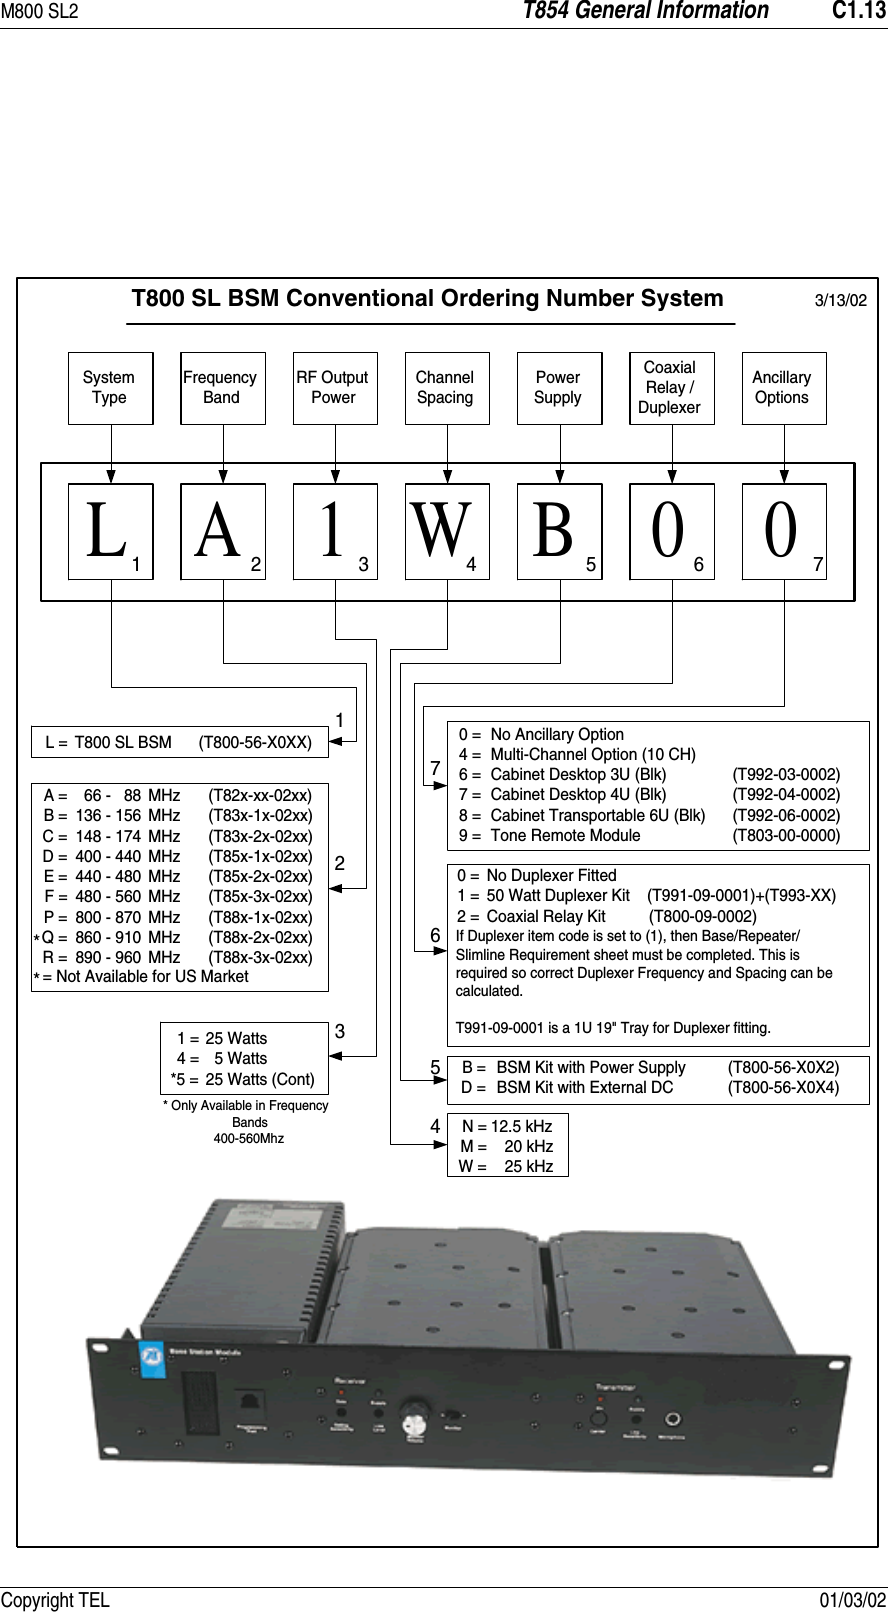 M800 SL2 T854 General Information C1.13Copyright TEL 01/03/02T800 SL BSM Conventional Ordering Number System             3/13/02L A 1 W B 0 0SystemTypeFrequencyBandRF OutputPowerChannelSpacingPowerSupplyCoaxialRelay /DuplexerAncillaryOptionsL = T800 SL BSM (T800-56-X0XX)1 =4 =*5 =25 Watts  5 Watts25 Watts (Cont)0 =4 =6 =7 =8 =9 =No Ancillary OptionMulti-Channel Option (10 CH)Cabinet Desktop 3U (Blk)Cabinet Desktop 4U (Blk)Cabinet Transportable 6U (Blk)Tone Remote Module(T992-03-0002)(T992-04-0002)(T992-06-0002)(T803-00-0000)0 =1 =2 =No Duplexer Fitted50 Watt Duplexer Kit    (T991-09-0001)+(T993-XX)Coaxial Relay Kit          (T800-09-0002)If Duplexer item code is set to (1), then Base/Repeater/Slimline Requirement sheet must be completed. This isrequired so correct Duplexer Frequency and Spacing can becalculated.T991-09-0001 is a 1U 19&quot; Tray for Duplexer fitting.N =M =W =12.5 kHz20 kHz25 kHzA =B =C =D =E =F =P =Q =R =  66 -   88136 - 156148 - 174400 - 440440 - 480480 - 560800 - 870860 - 910890 - 960(T82x-xx-02xx)(T83x-1x-02xx)(T83x-2x-02xx)(T85x-1x-02xx)(T85x-2x-02xx)(T85x-3x-02xx)(T88x-1x-02xx)(T88x-2x-02xx)(T88x-3x-02xx)MHzMHzMHzMHzMHzMHzMHzMHzMHz**= Not Available for US MarketB =D =BSM Kit with Power SupplyBSM Kit with External DC(T800-56-X0X2)(T800-56-X0X4)11223347565674* Only Available in FrequencyBands400-560Mhz